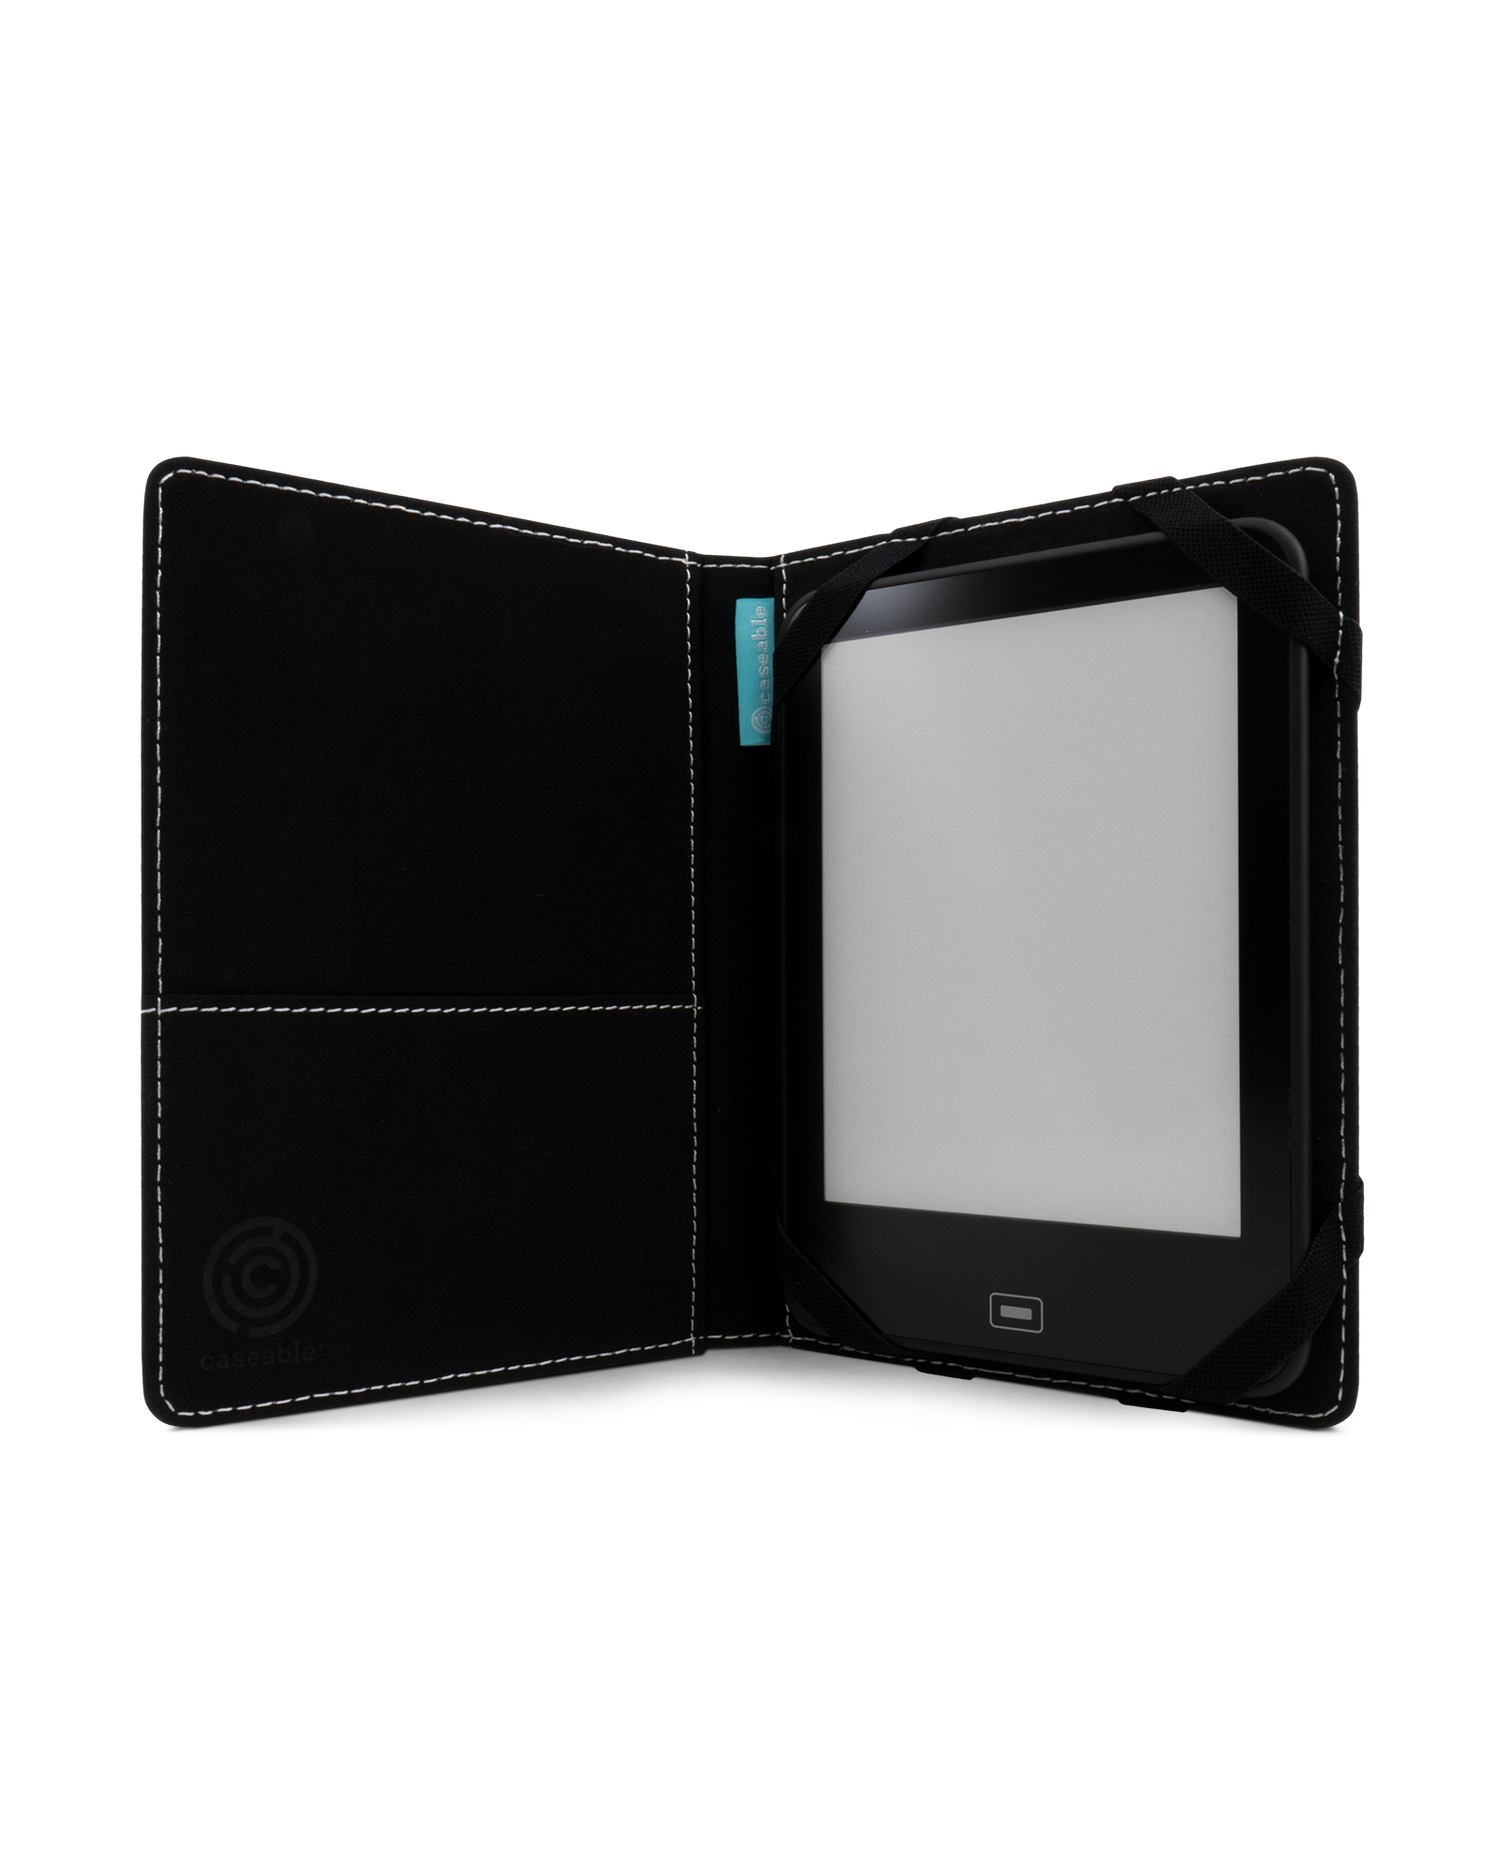 Blue Marble eReader Case S: Opened interior view